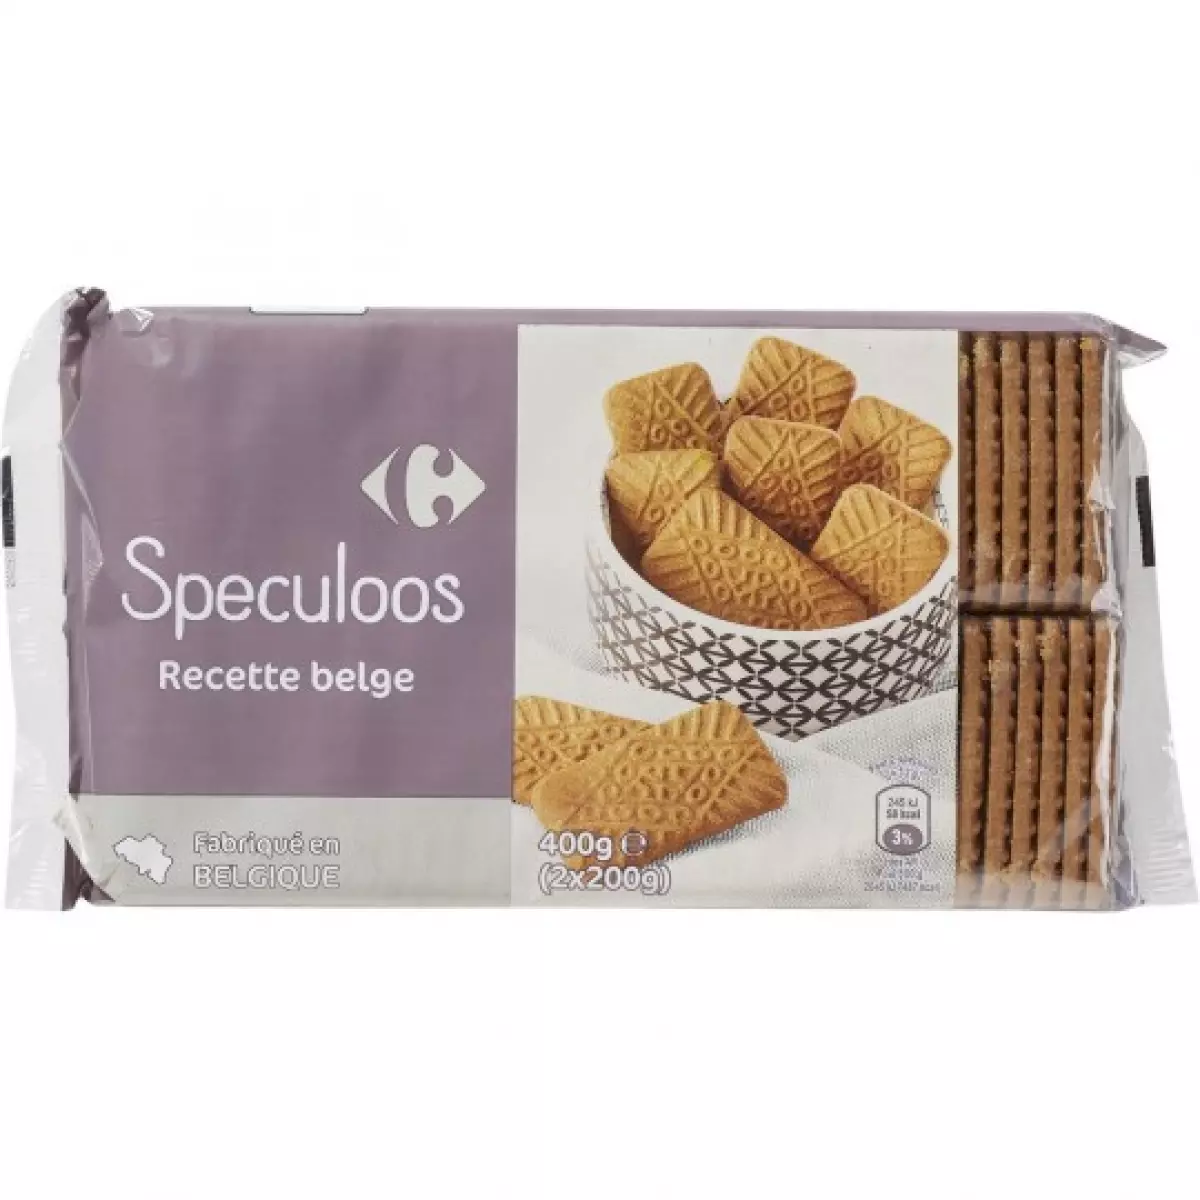 BISCUIT SPECULOOS PQ 500 GR CARREFOUR